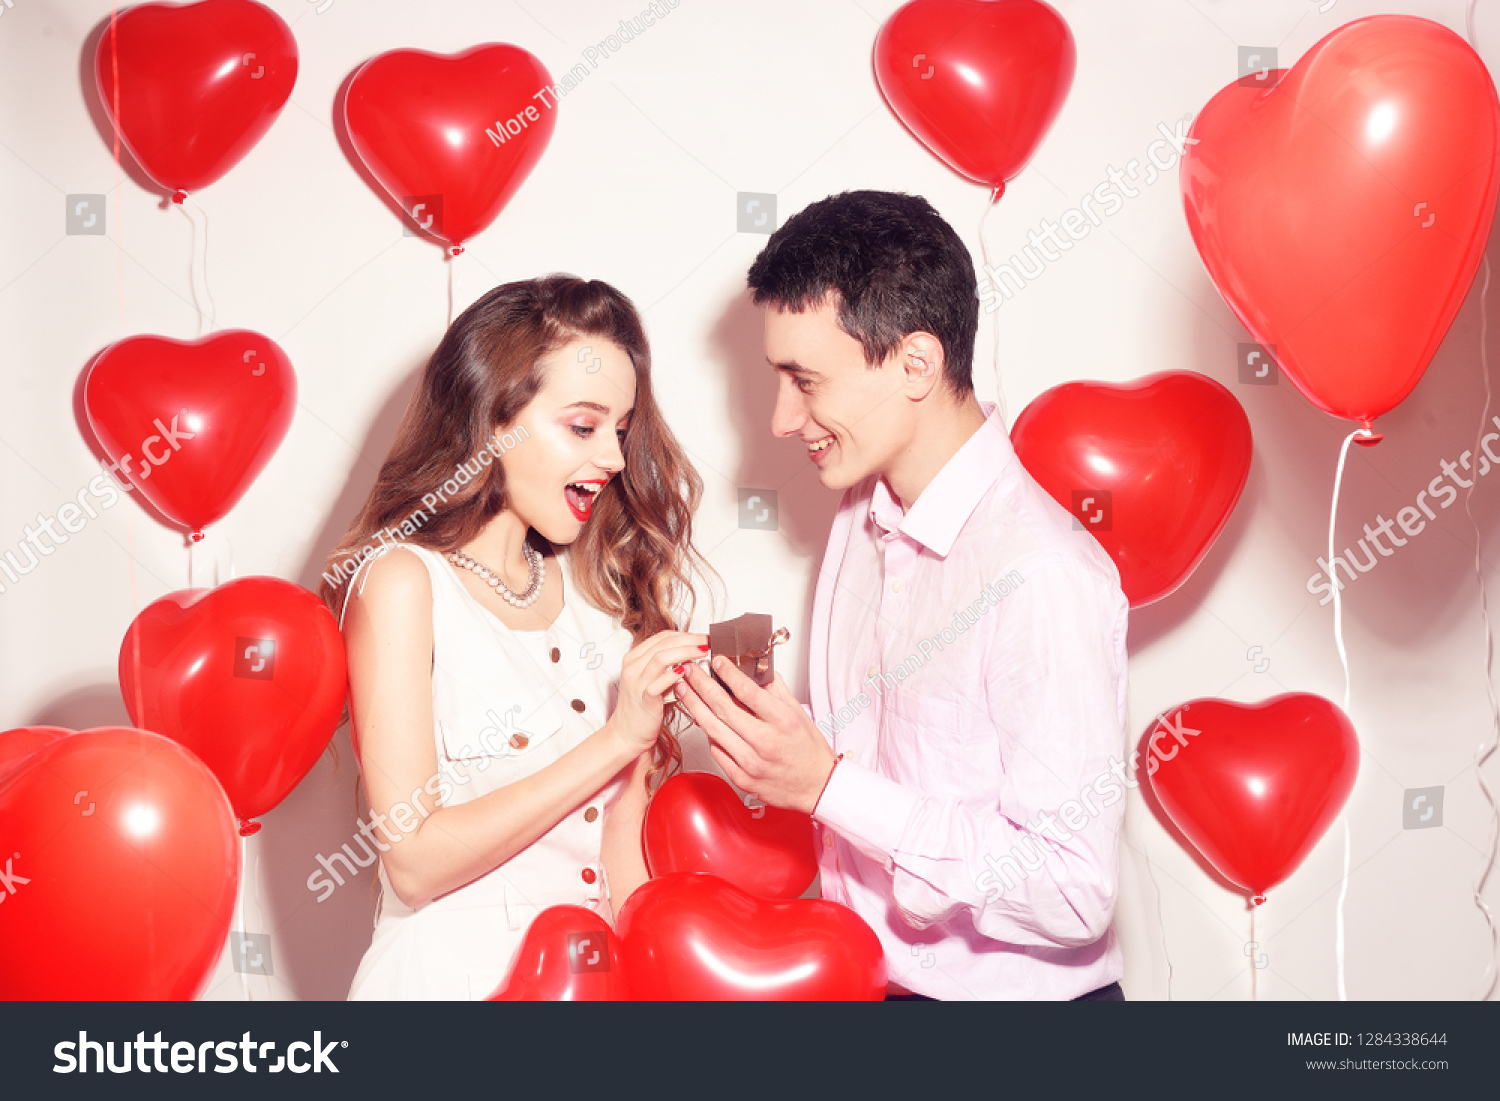 Valentines day Balloons Heart Romantic I Love You His/Her Boy/girlfriend Baloons 